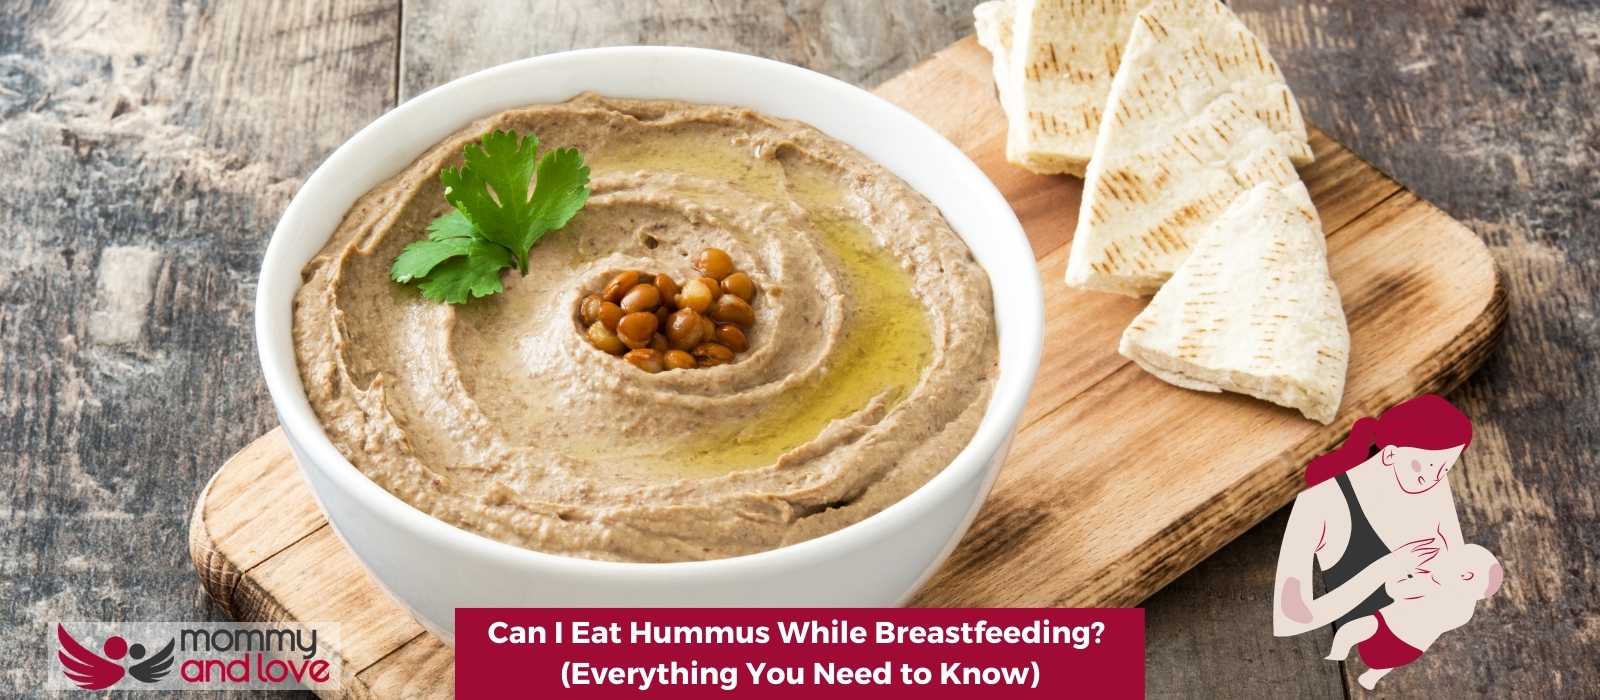 Can I Eat Hummus While Breastfeeding (Everything You Need to Know)